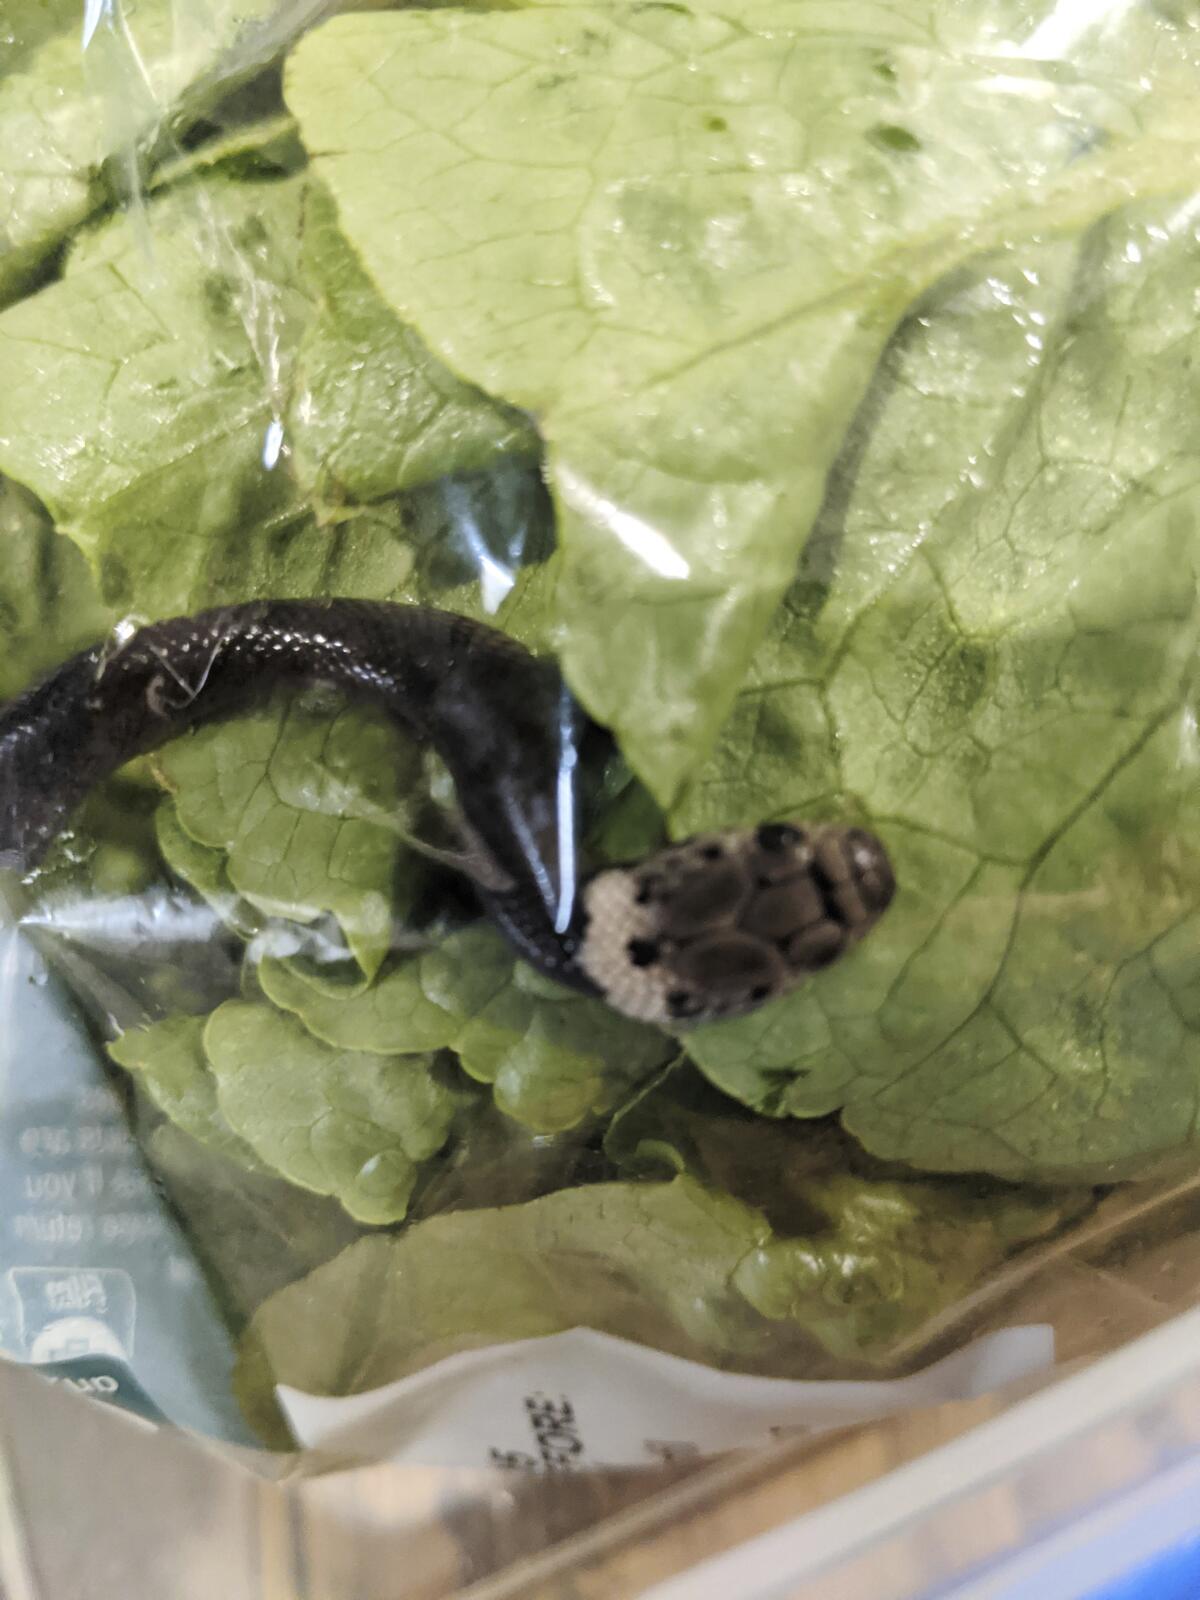 In this photo provided by Alex White, a Pale-headed snake is photographed in a bag of lettuce in Sydney, Monday, April 12, 2021. White thought he was watching a huge worm writhing in plastic-wrapped lettuce he'd just brought home from a Sydney supermarket, until a snake tongue flicked. (Alex White via AP)